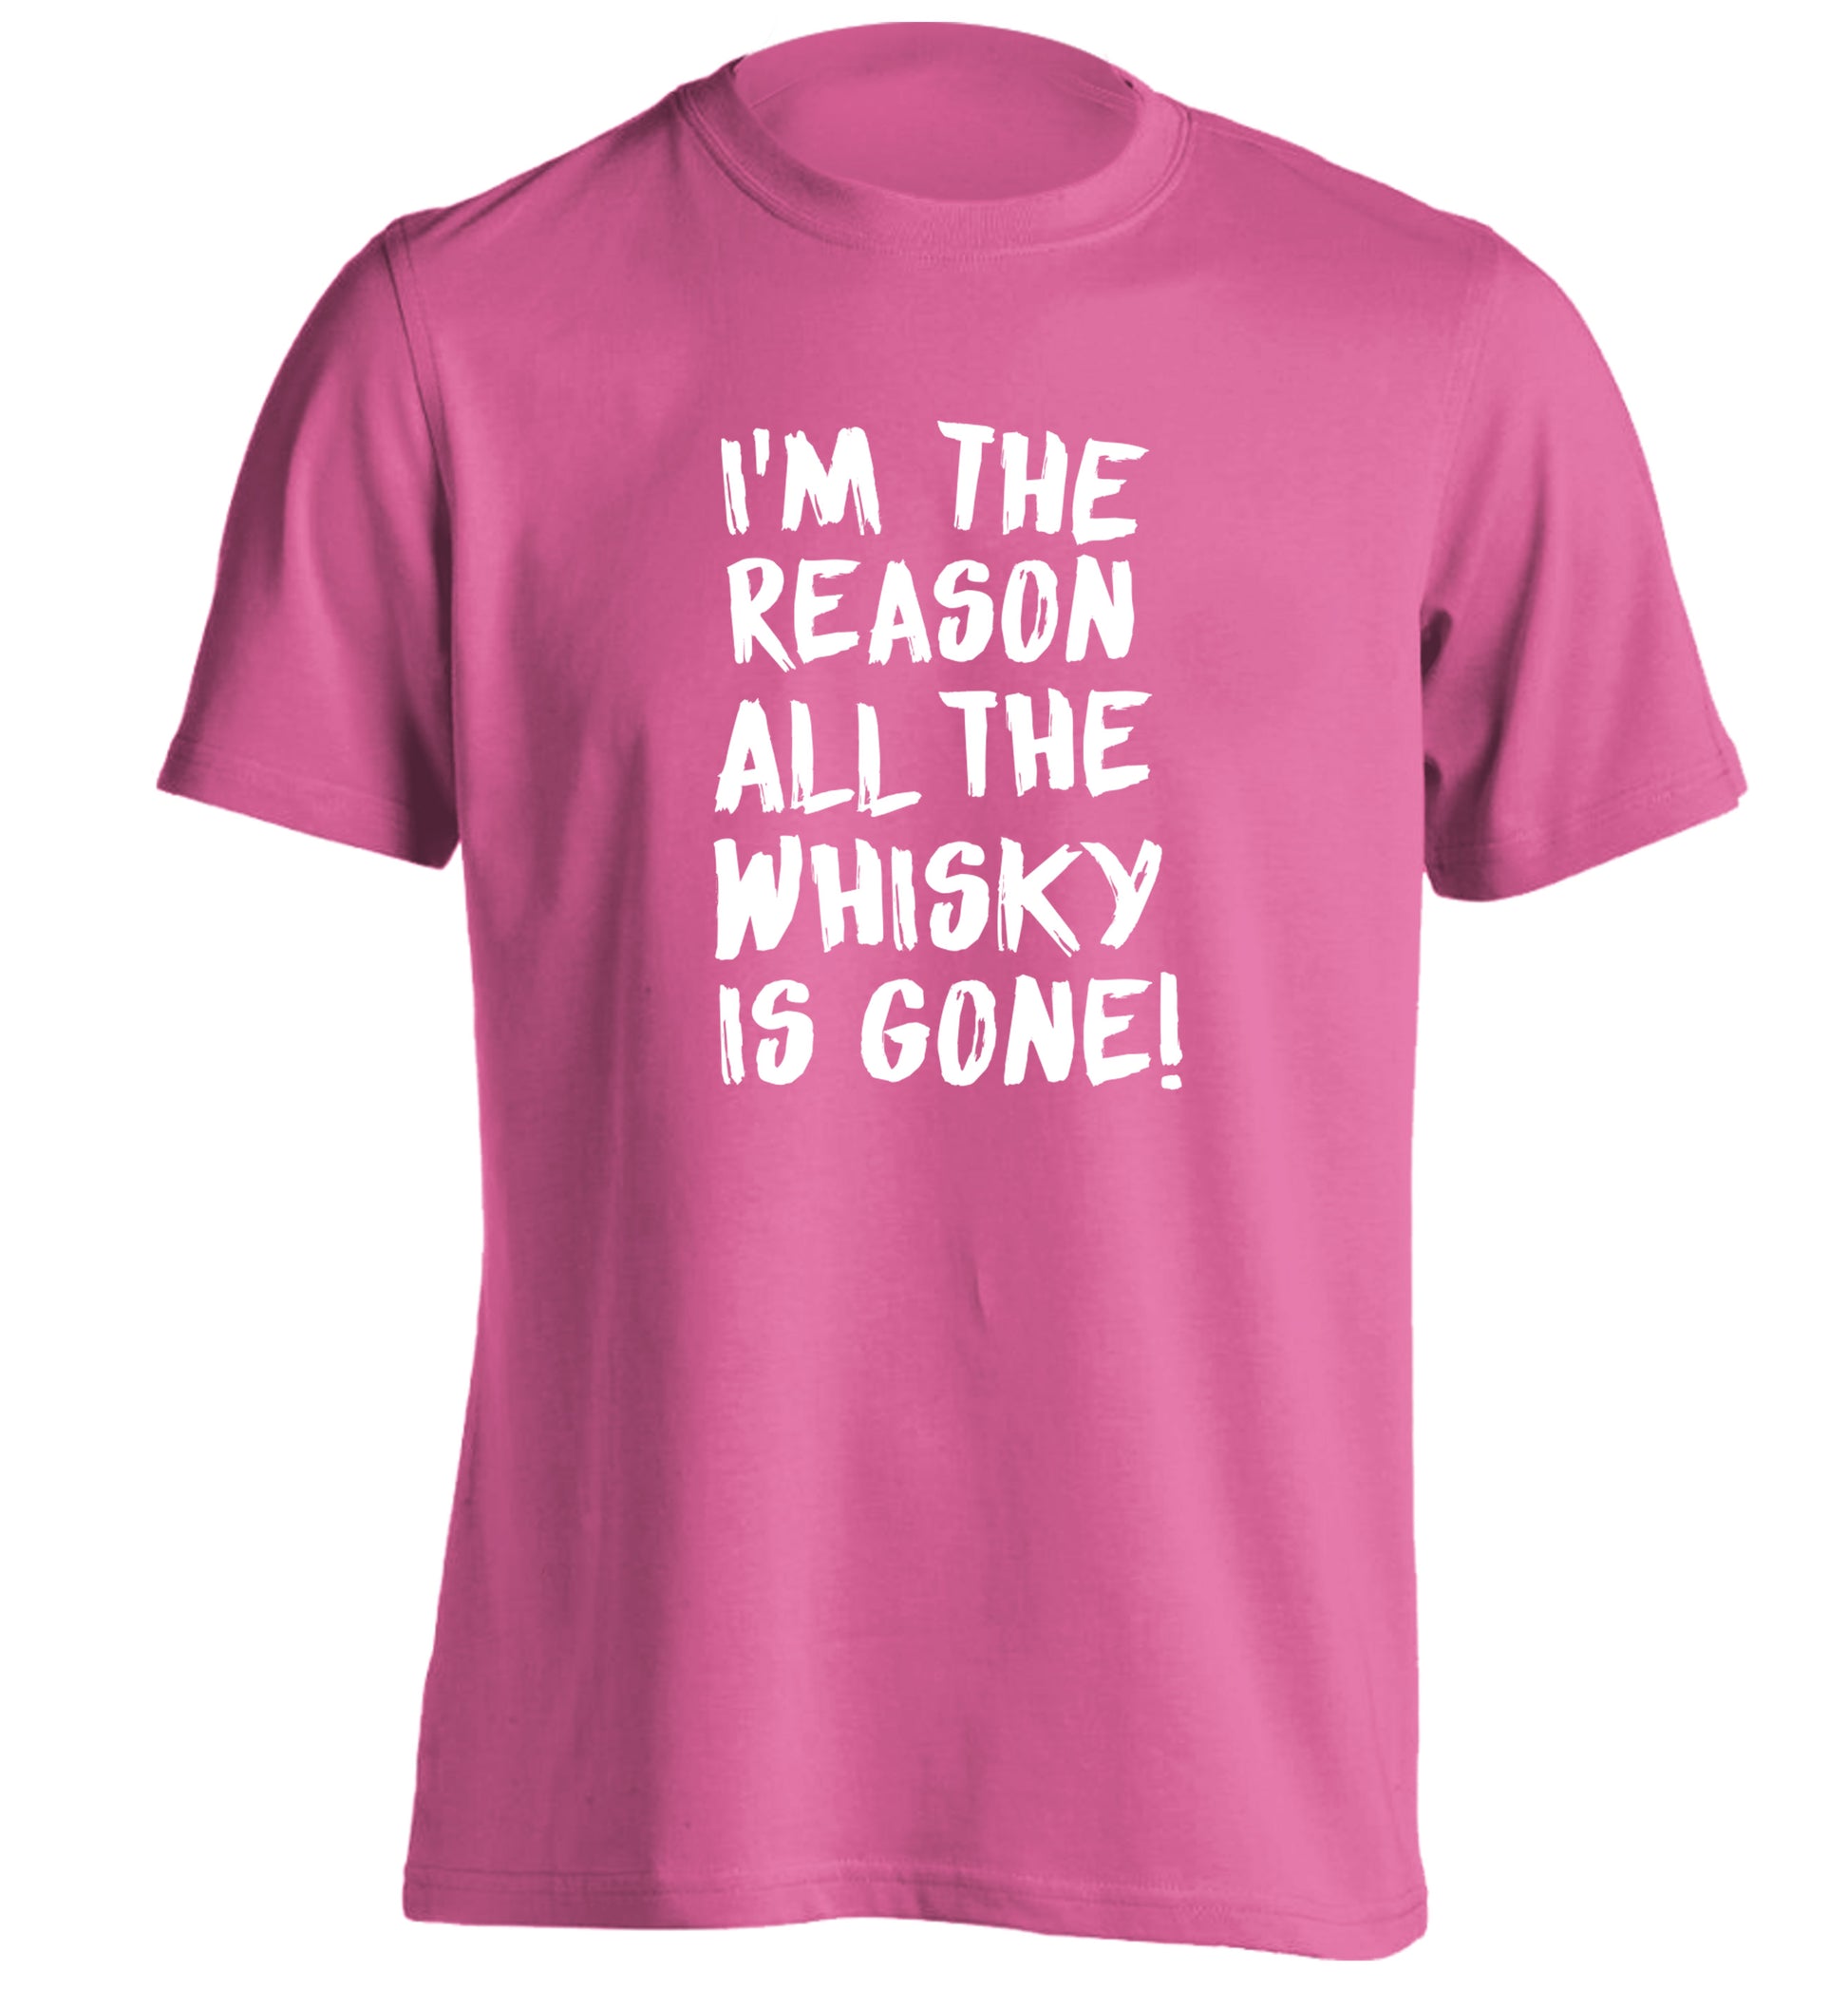 I'm the reason all the whisky is gone adults unisex pink Tshirt 2XL